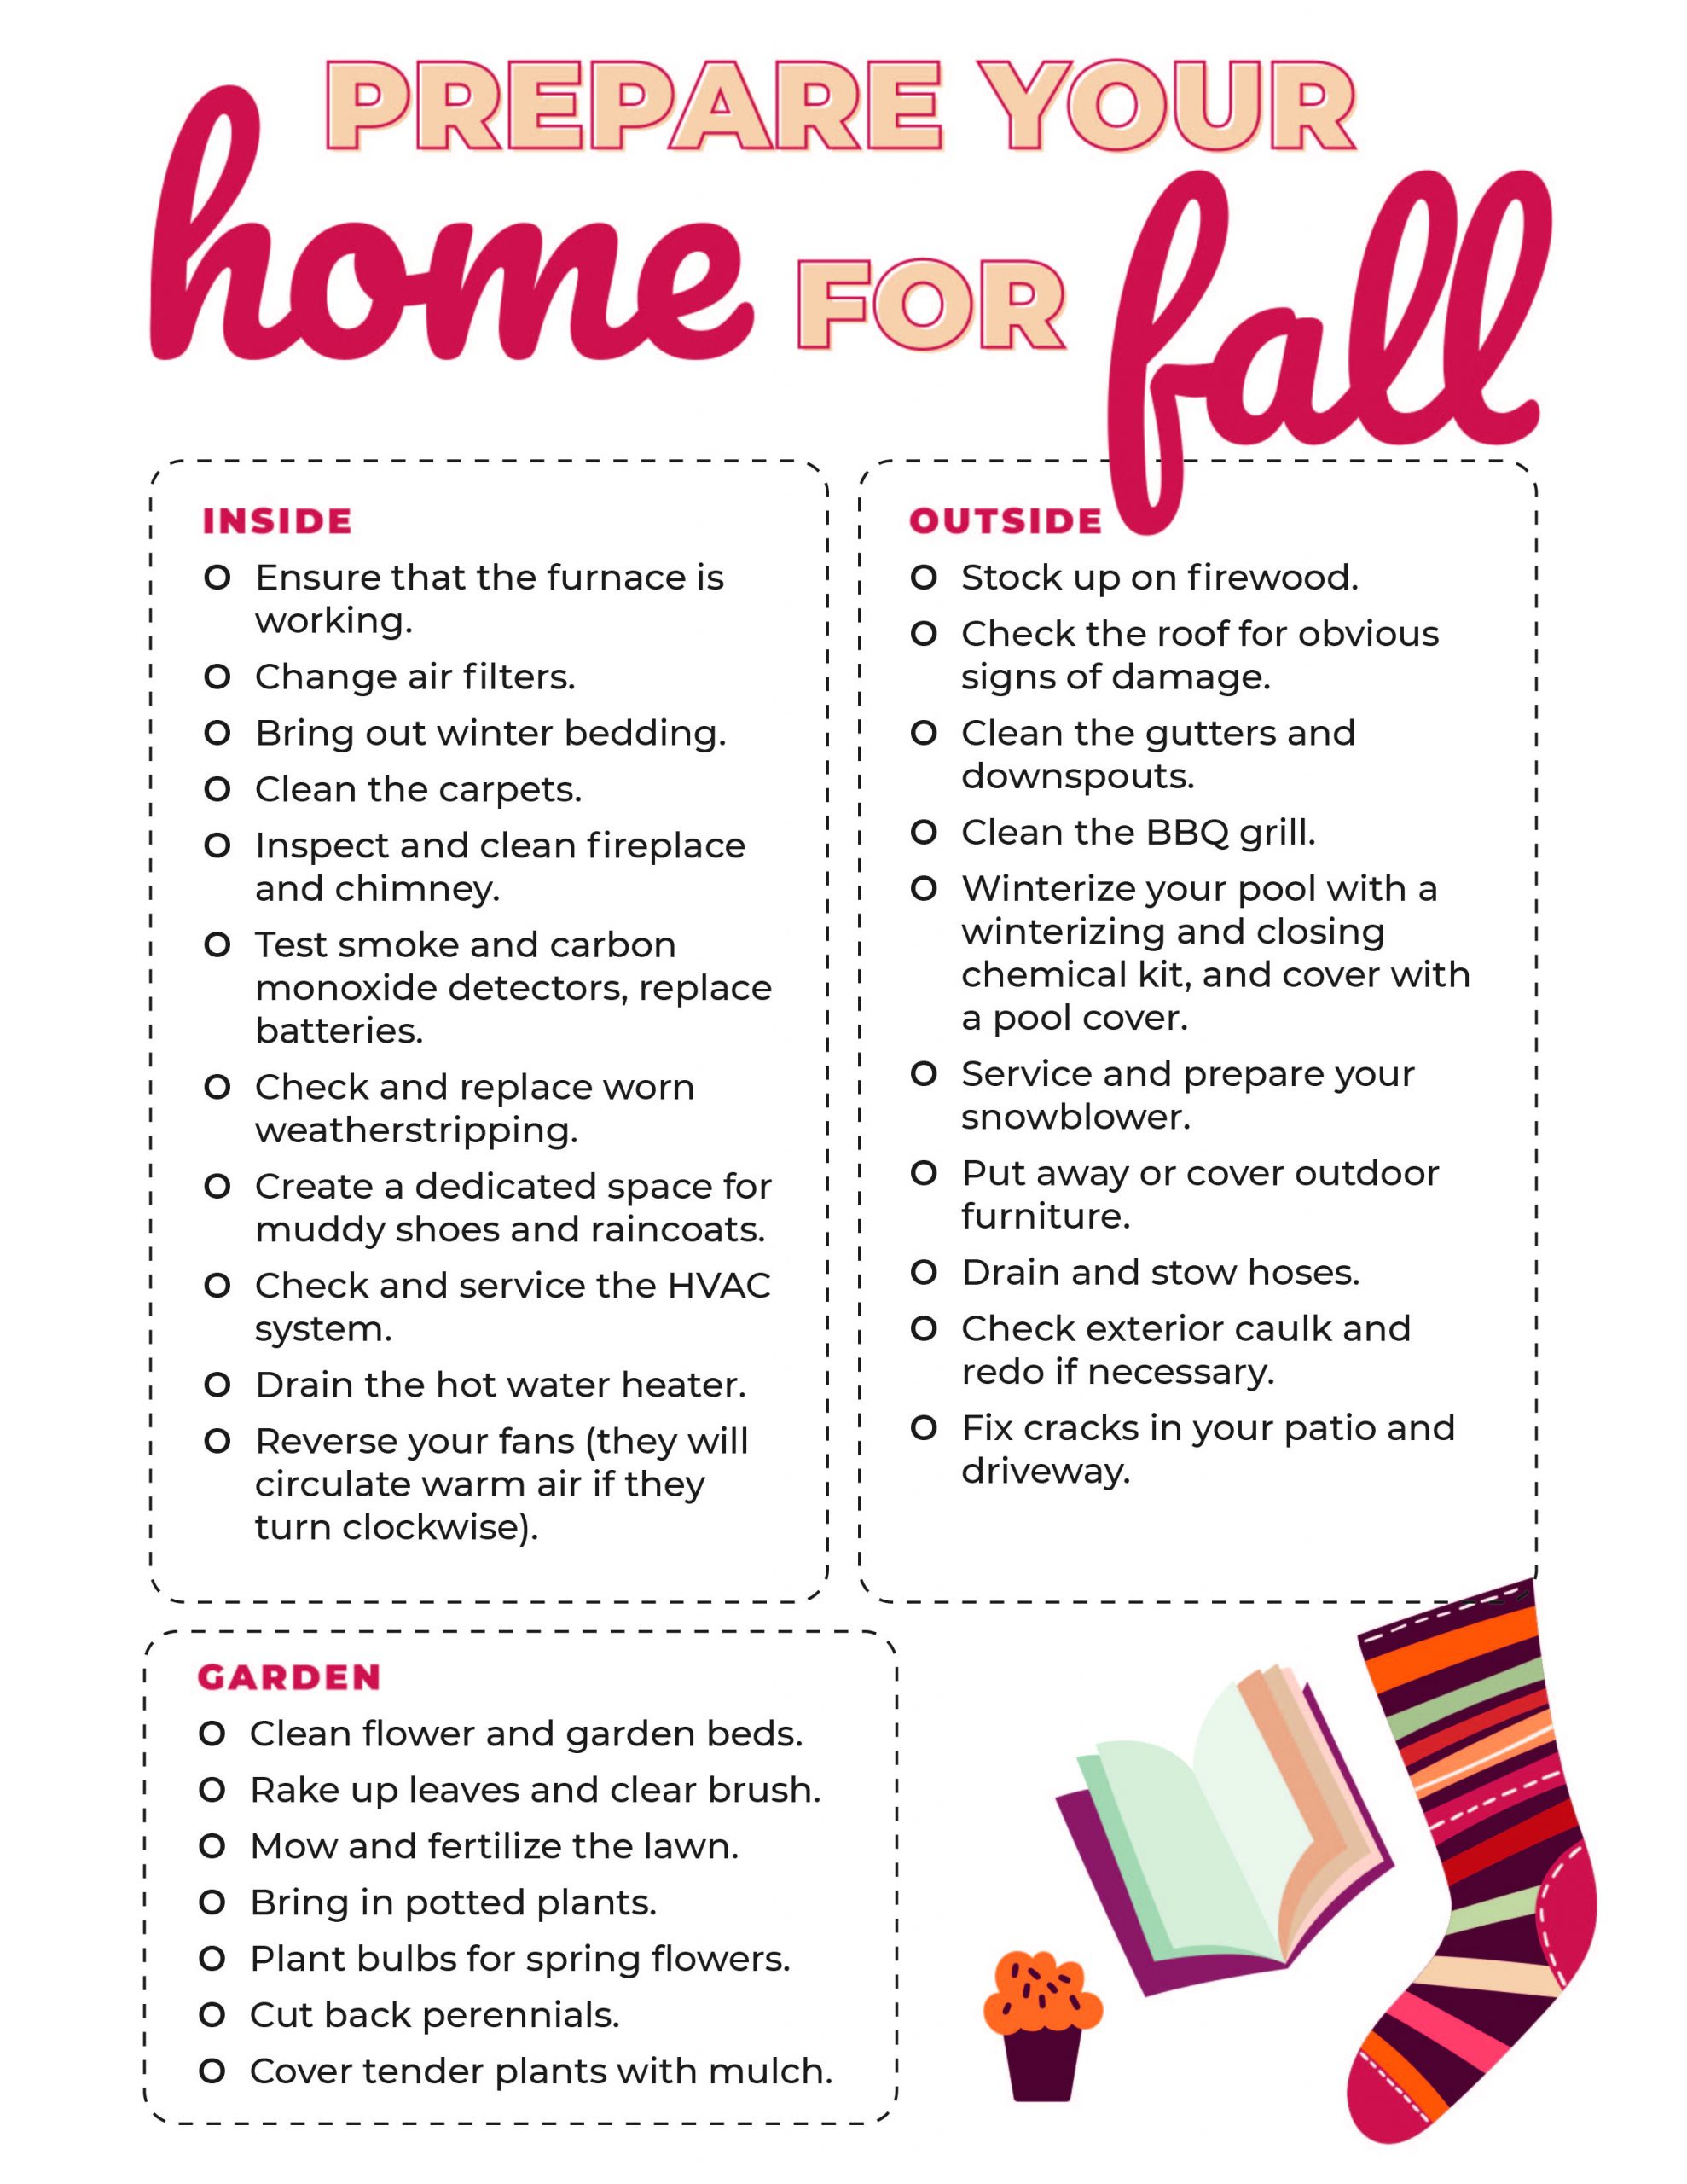 Sheet of paper with how to prepare your home check list on it